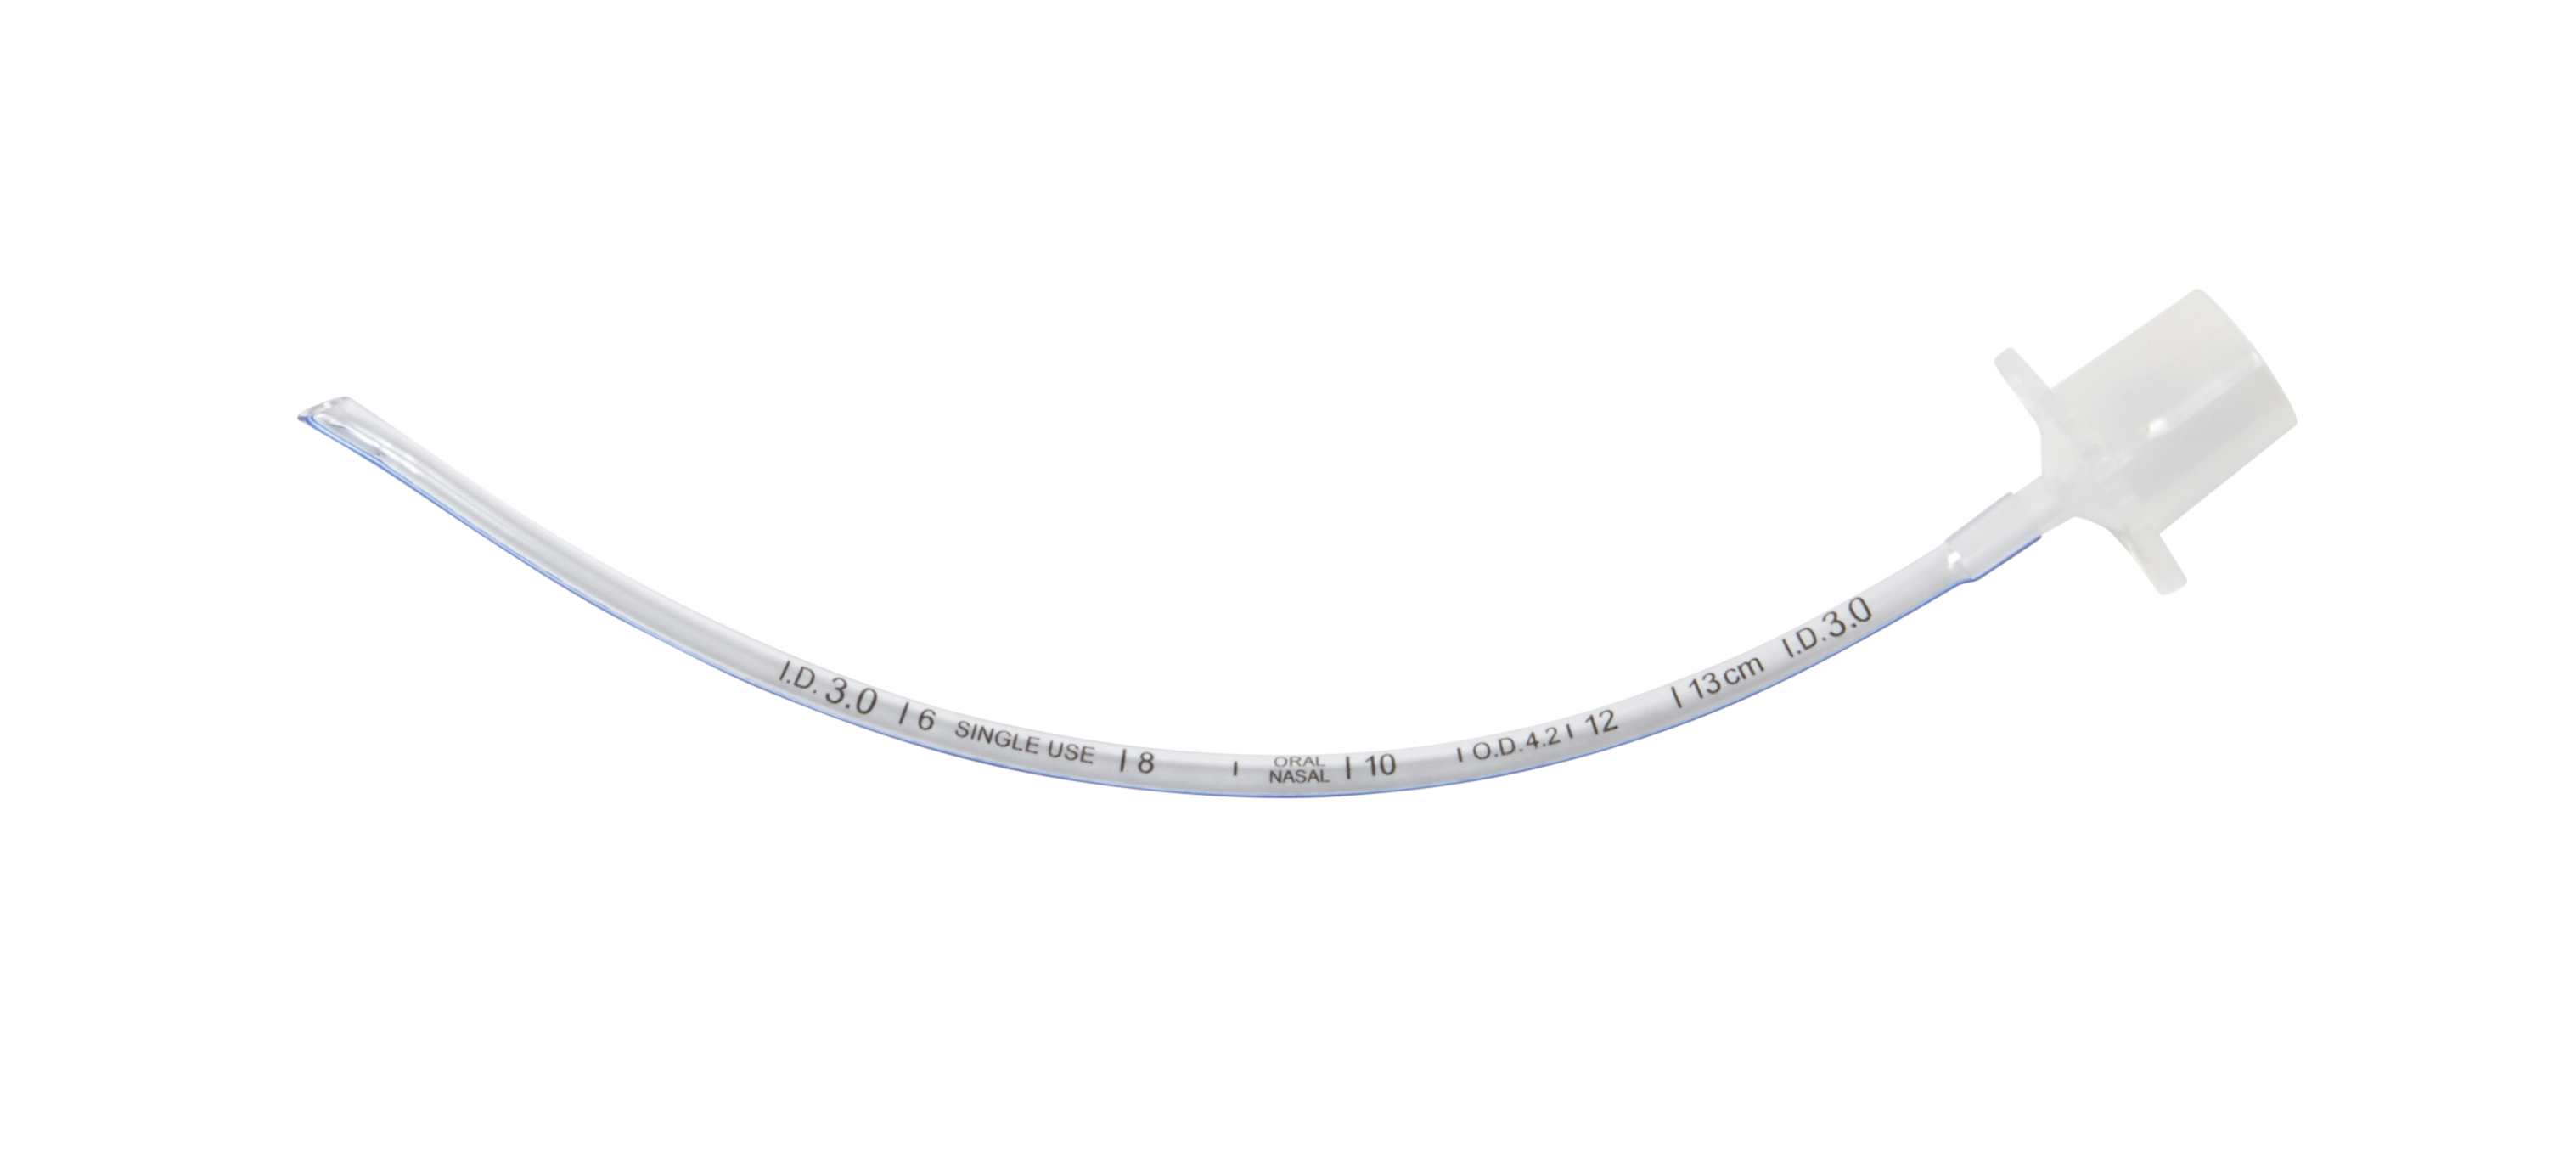 KRUUSE PVC Endotracheal Tubus, without cuff, ID 3.0 mm, OD 4.2 mm, 13 Fr x 16.5 cm (6.5''), 10/pk